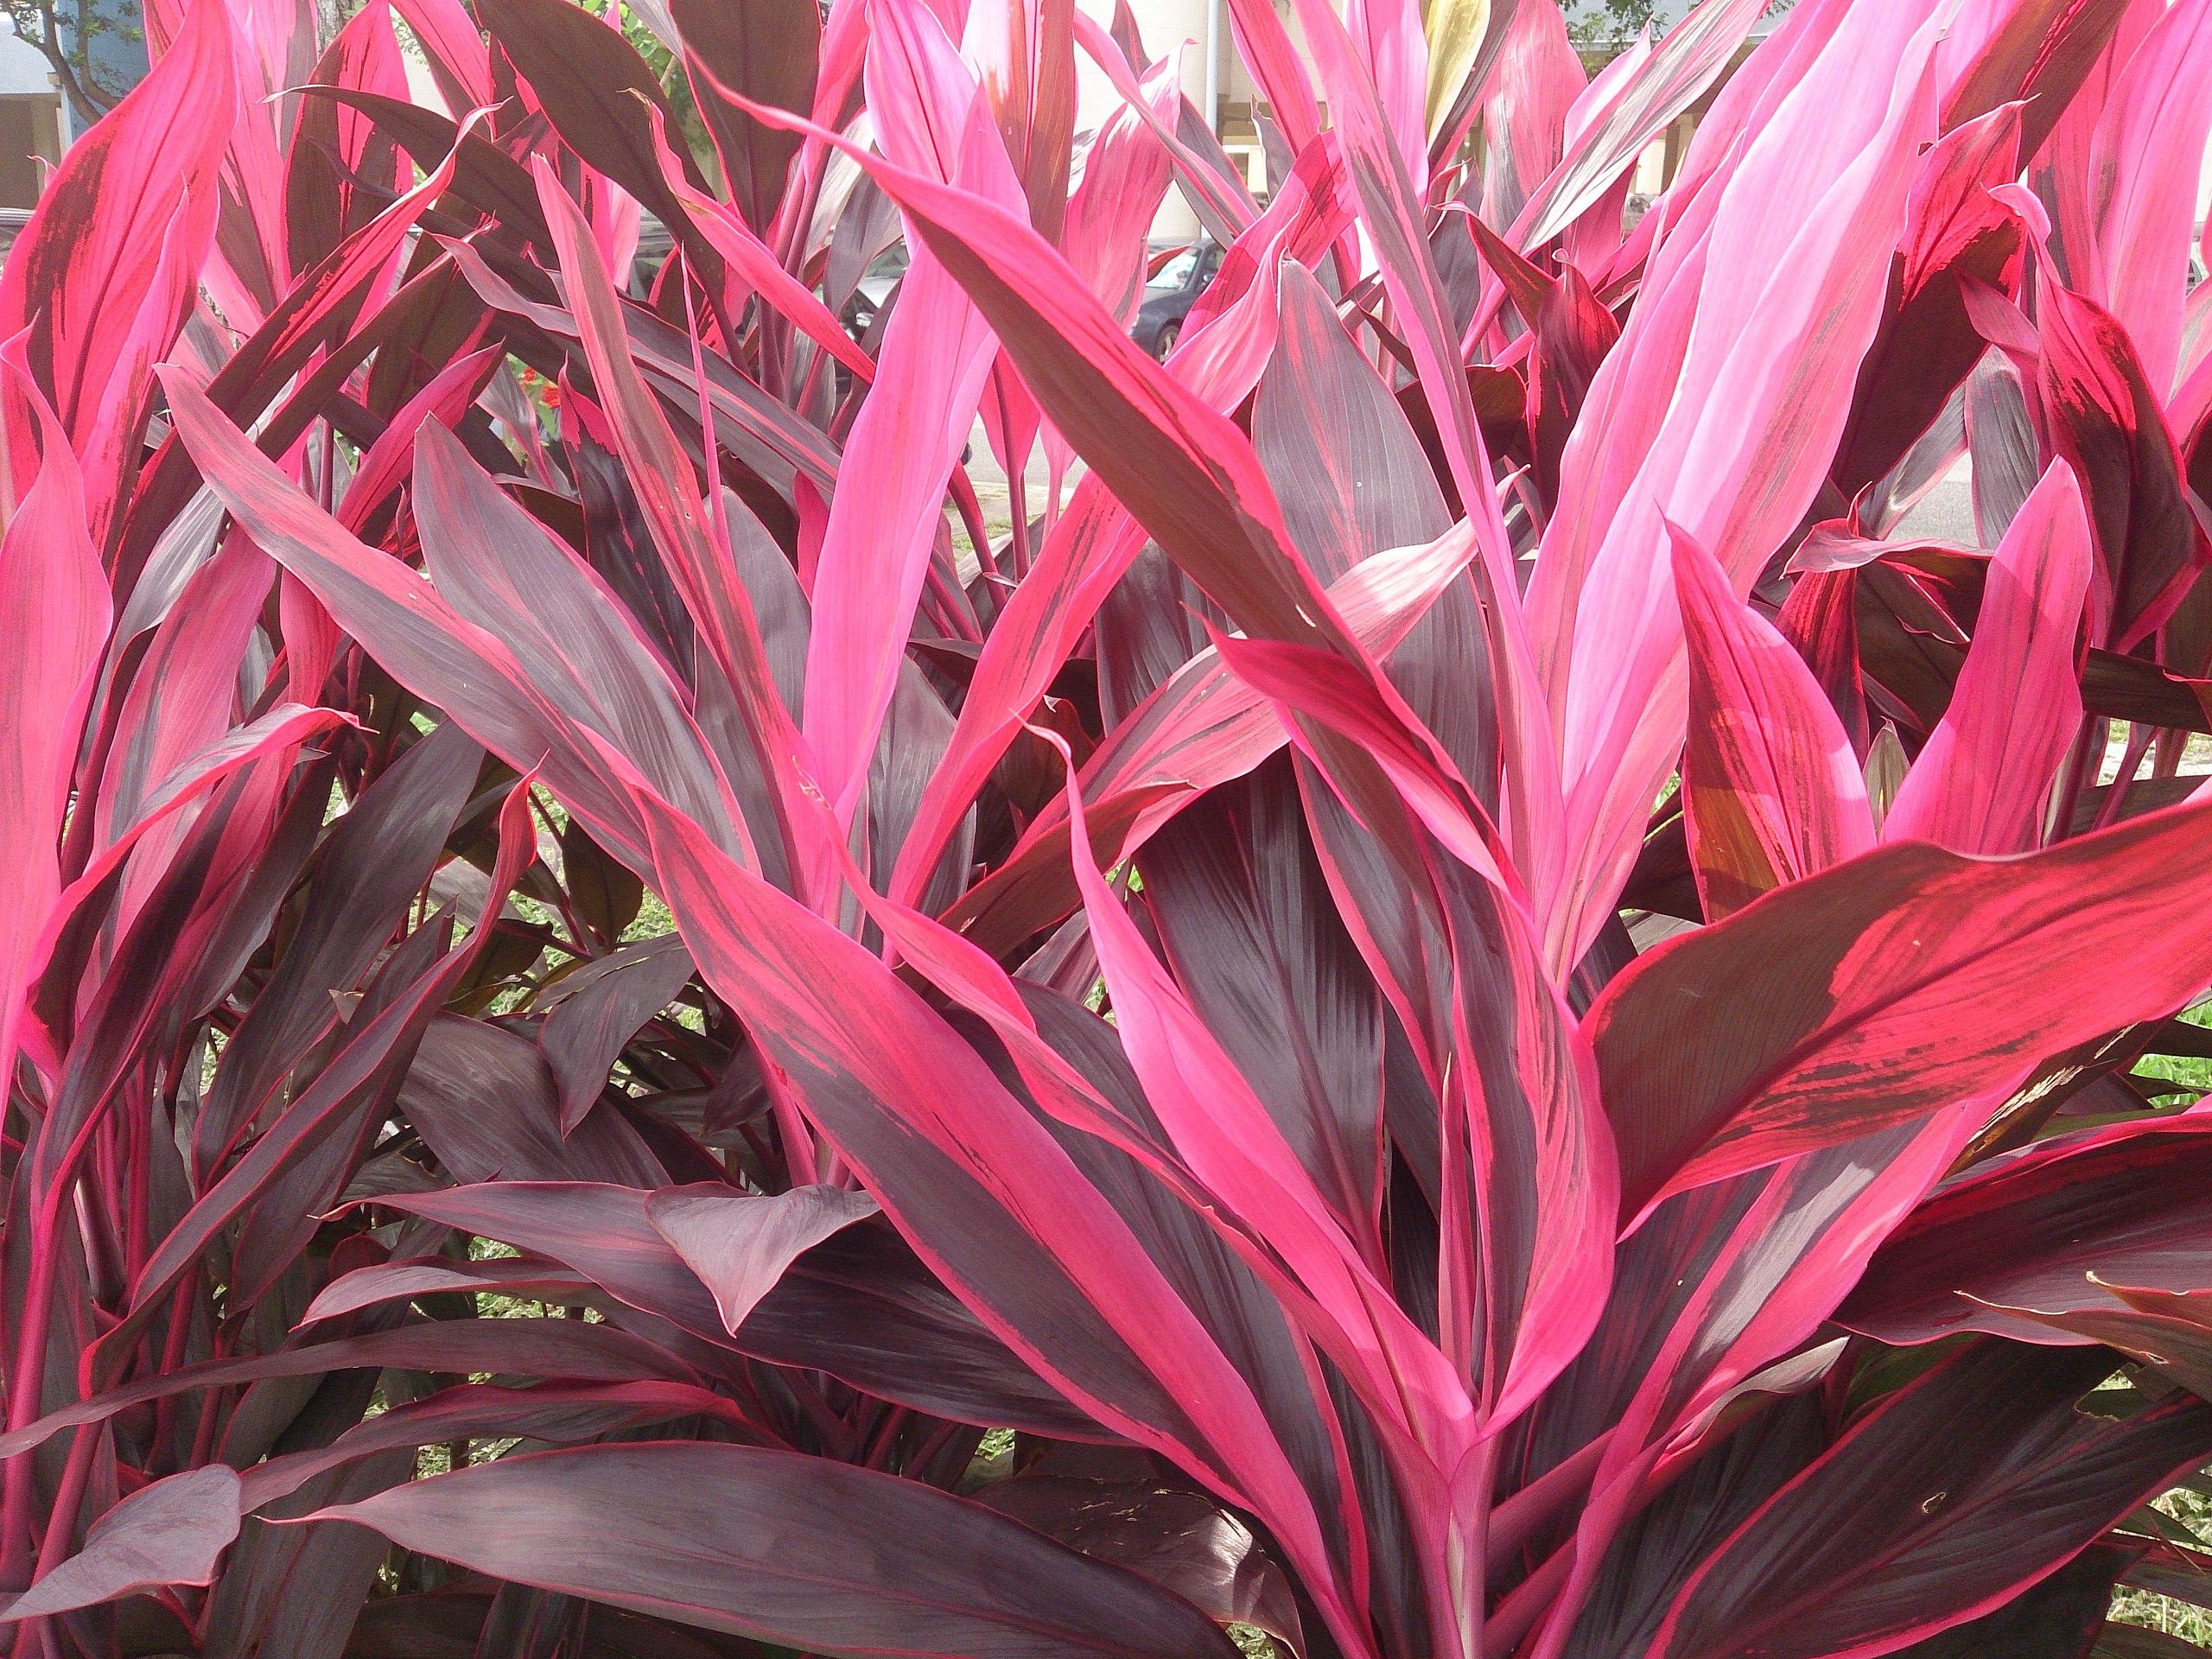 pink-burgundy foliage and stems